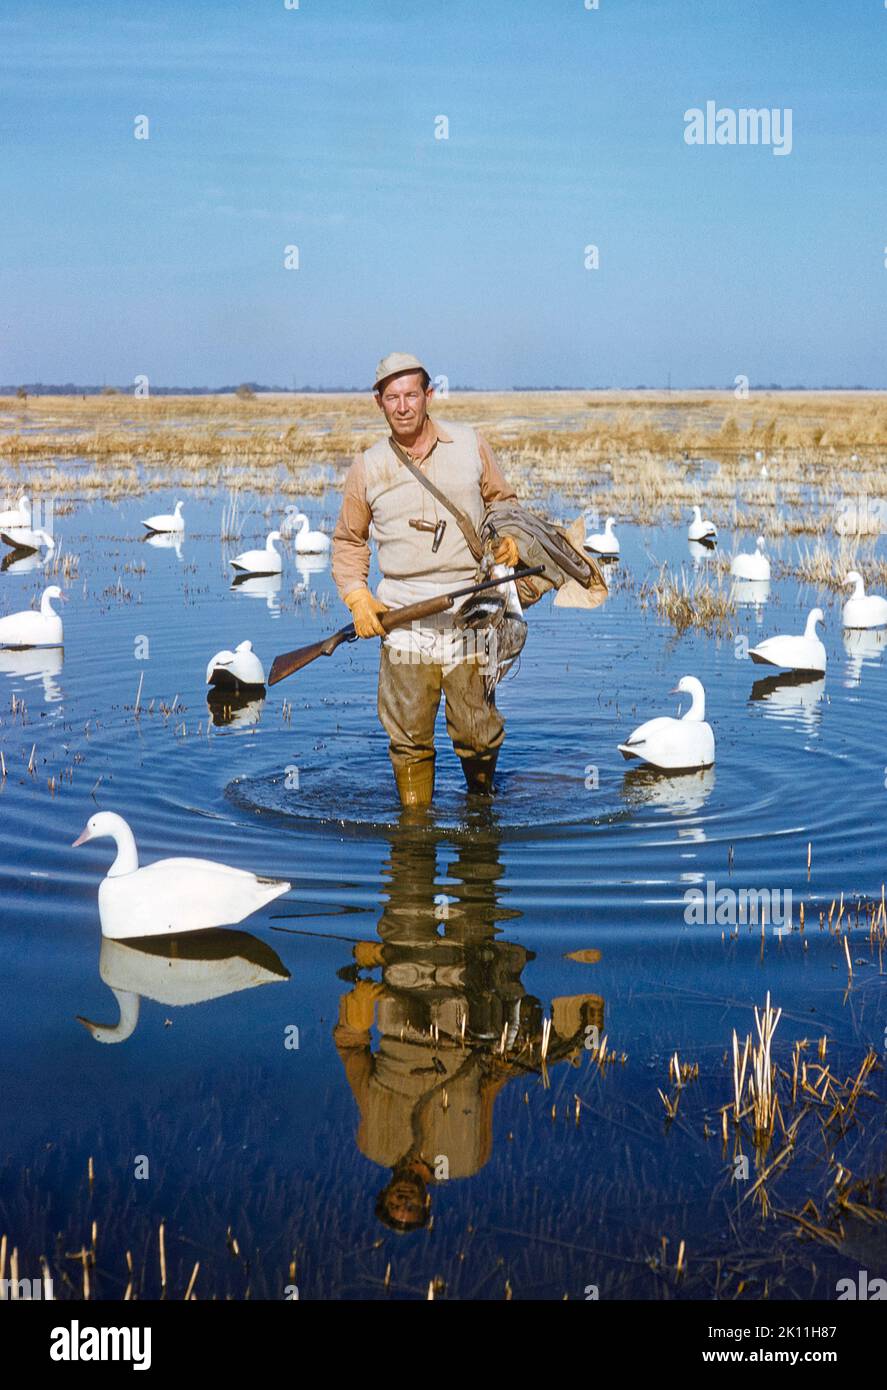 Man Waterfowl Hunting, Nevada, USA, toni Frissell Collection, novembre 1958 Foto Stock